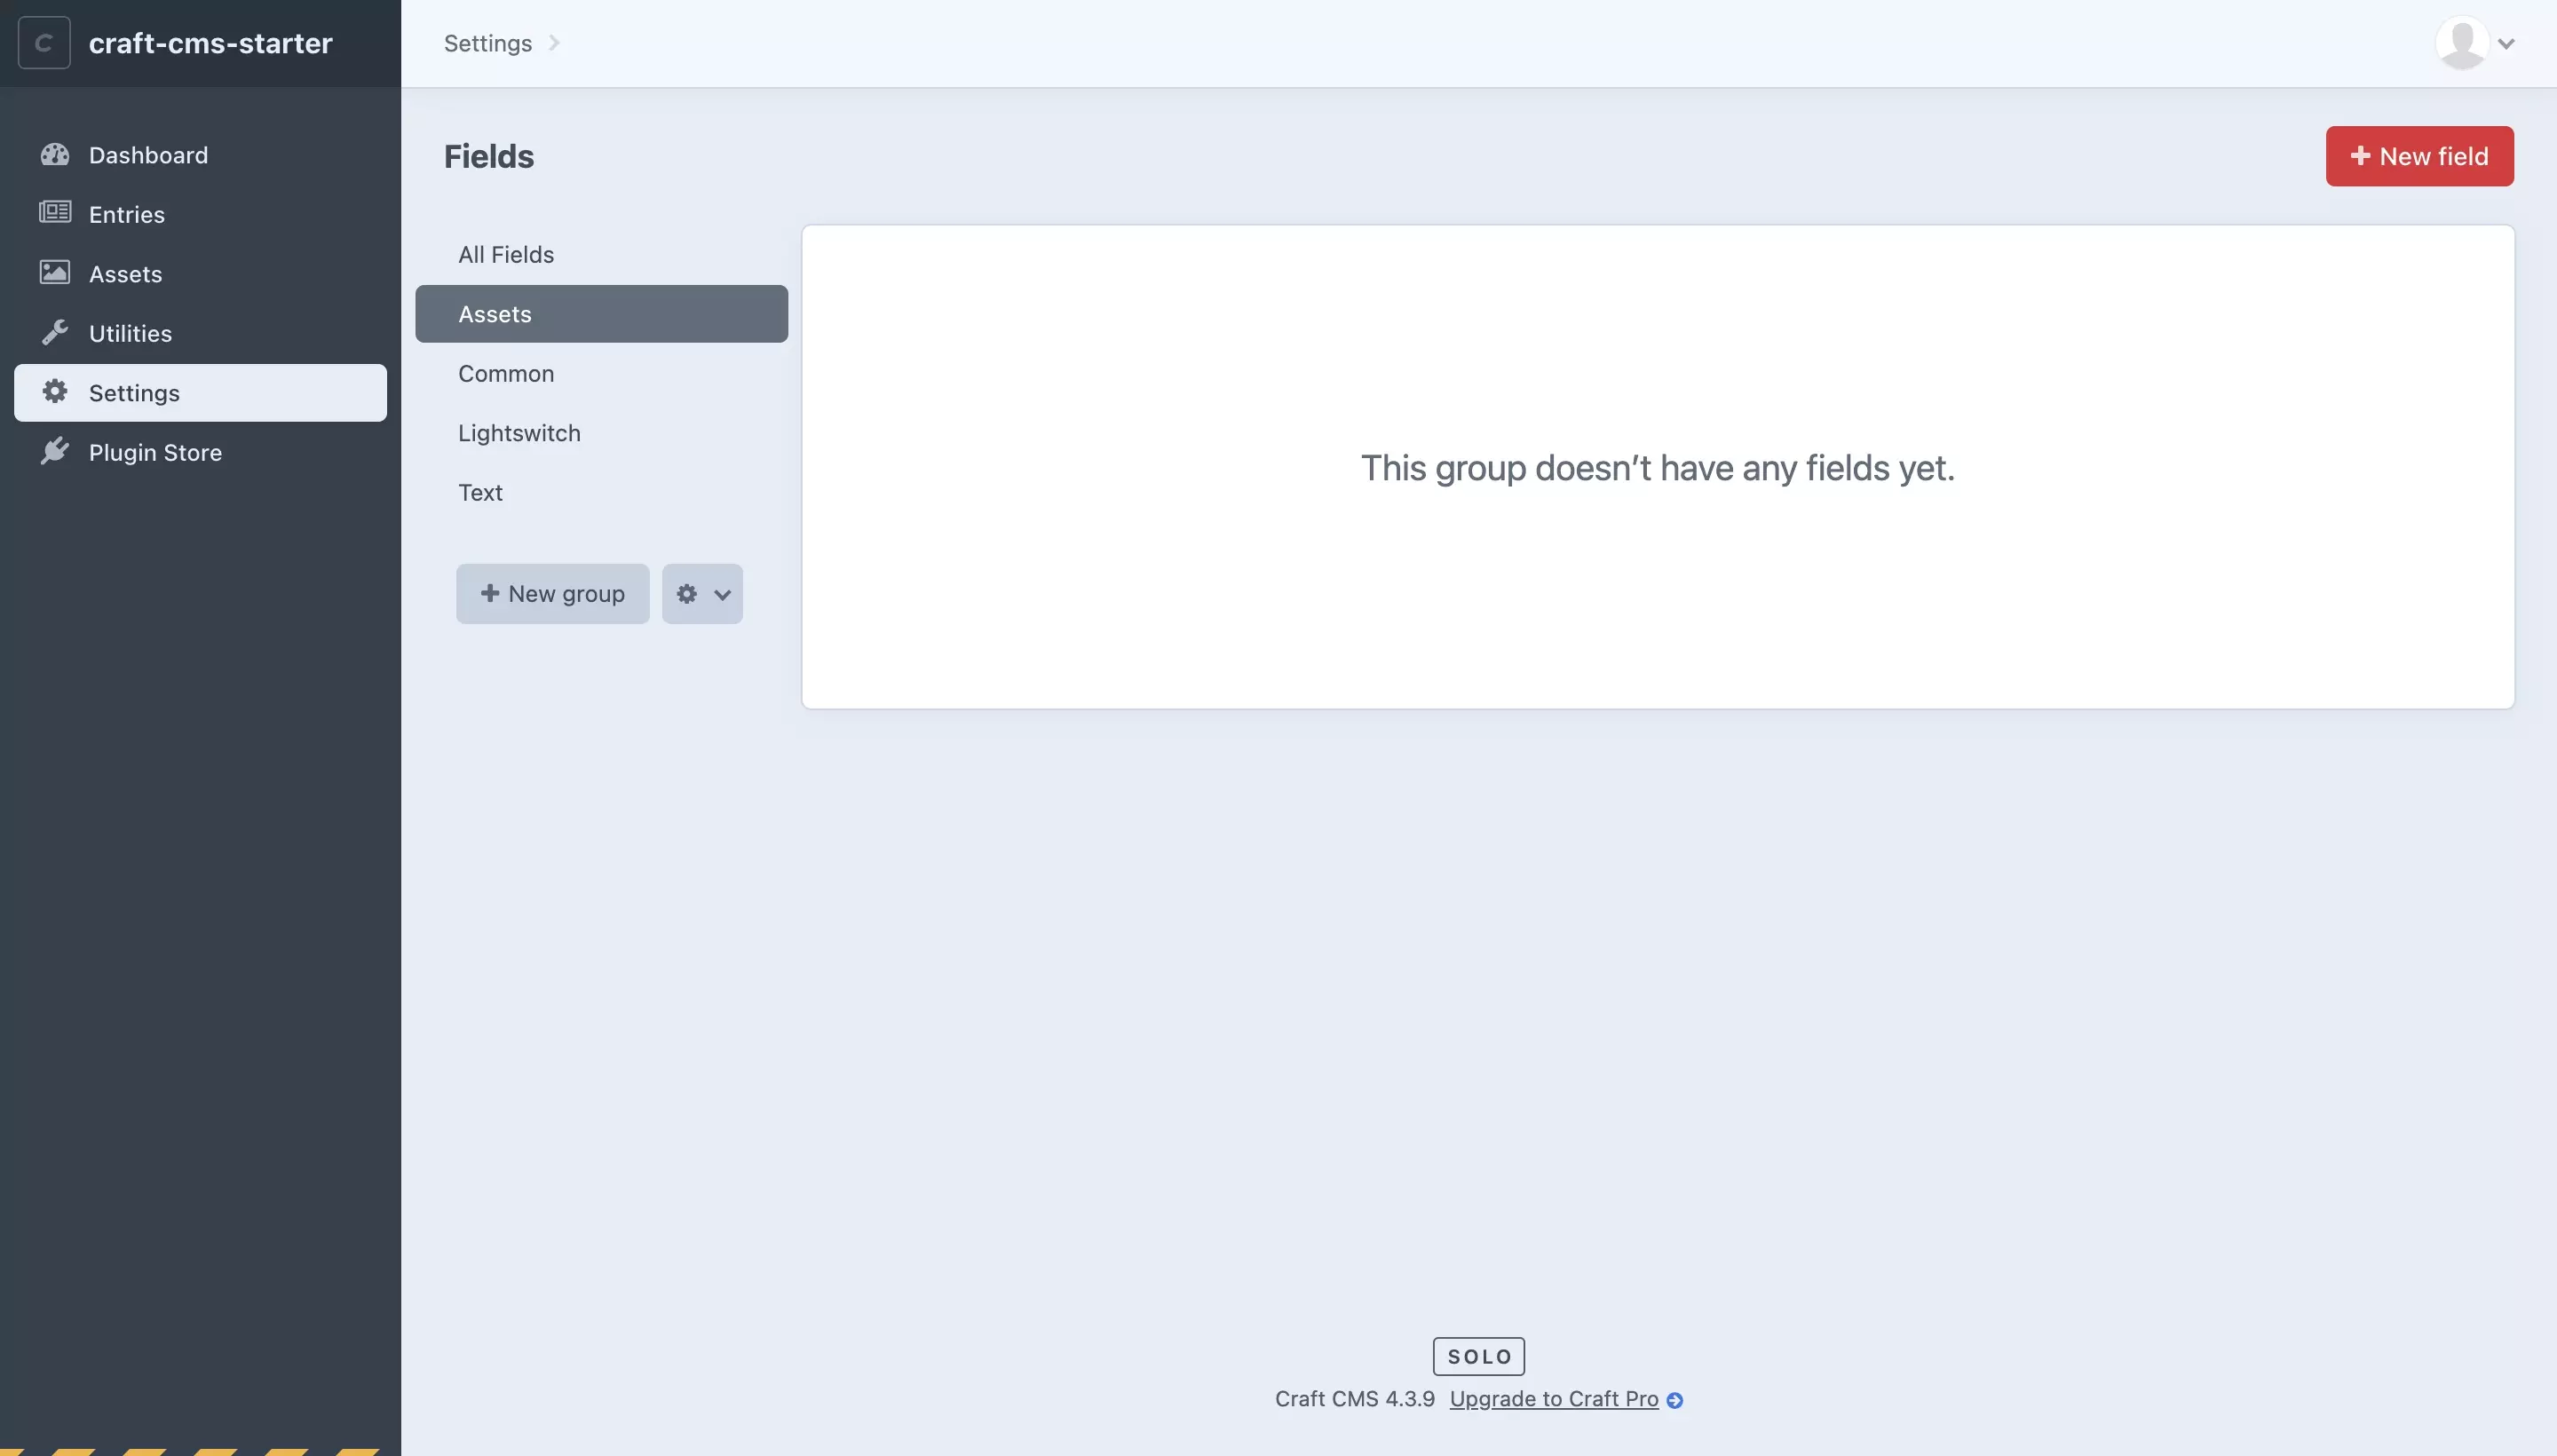 A screenshot of the Craft CMS Fields page with the Asset group selected.